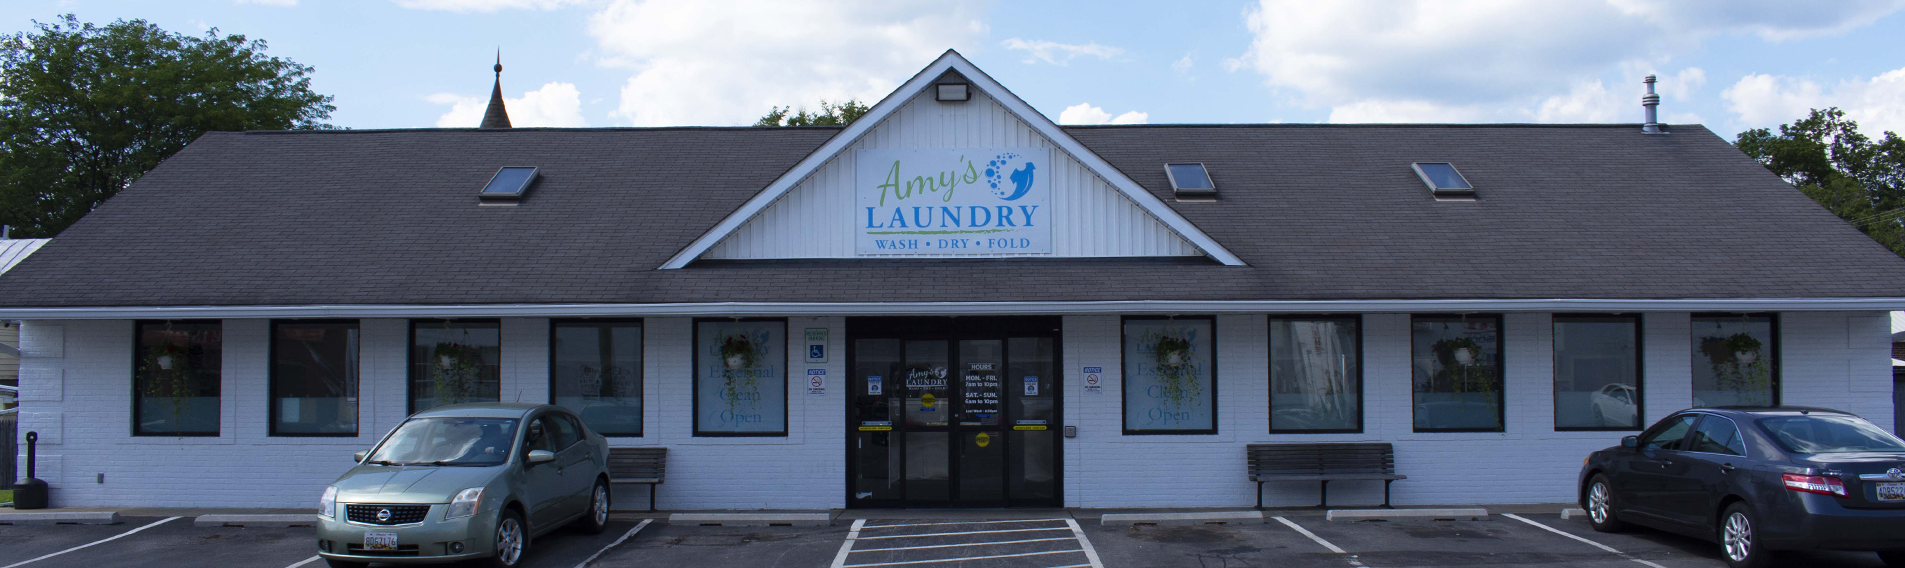 Amy's Laundry in Westminster Md